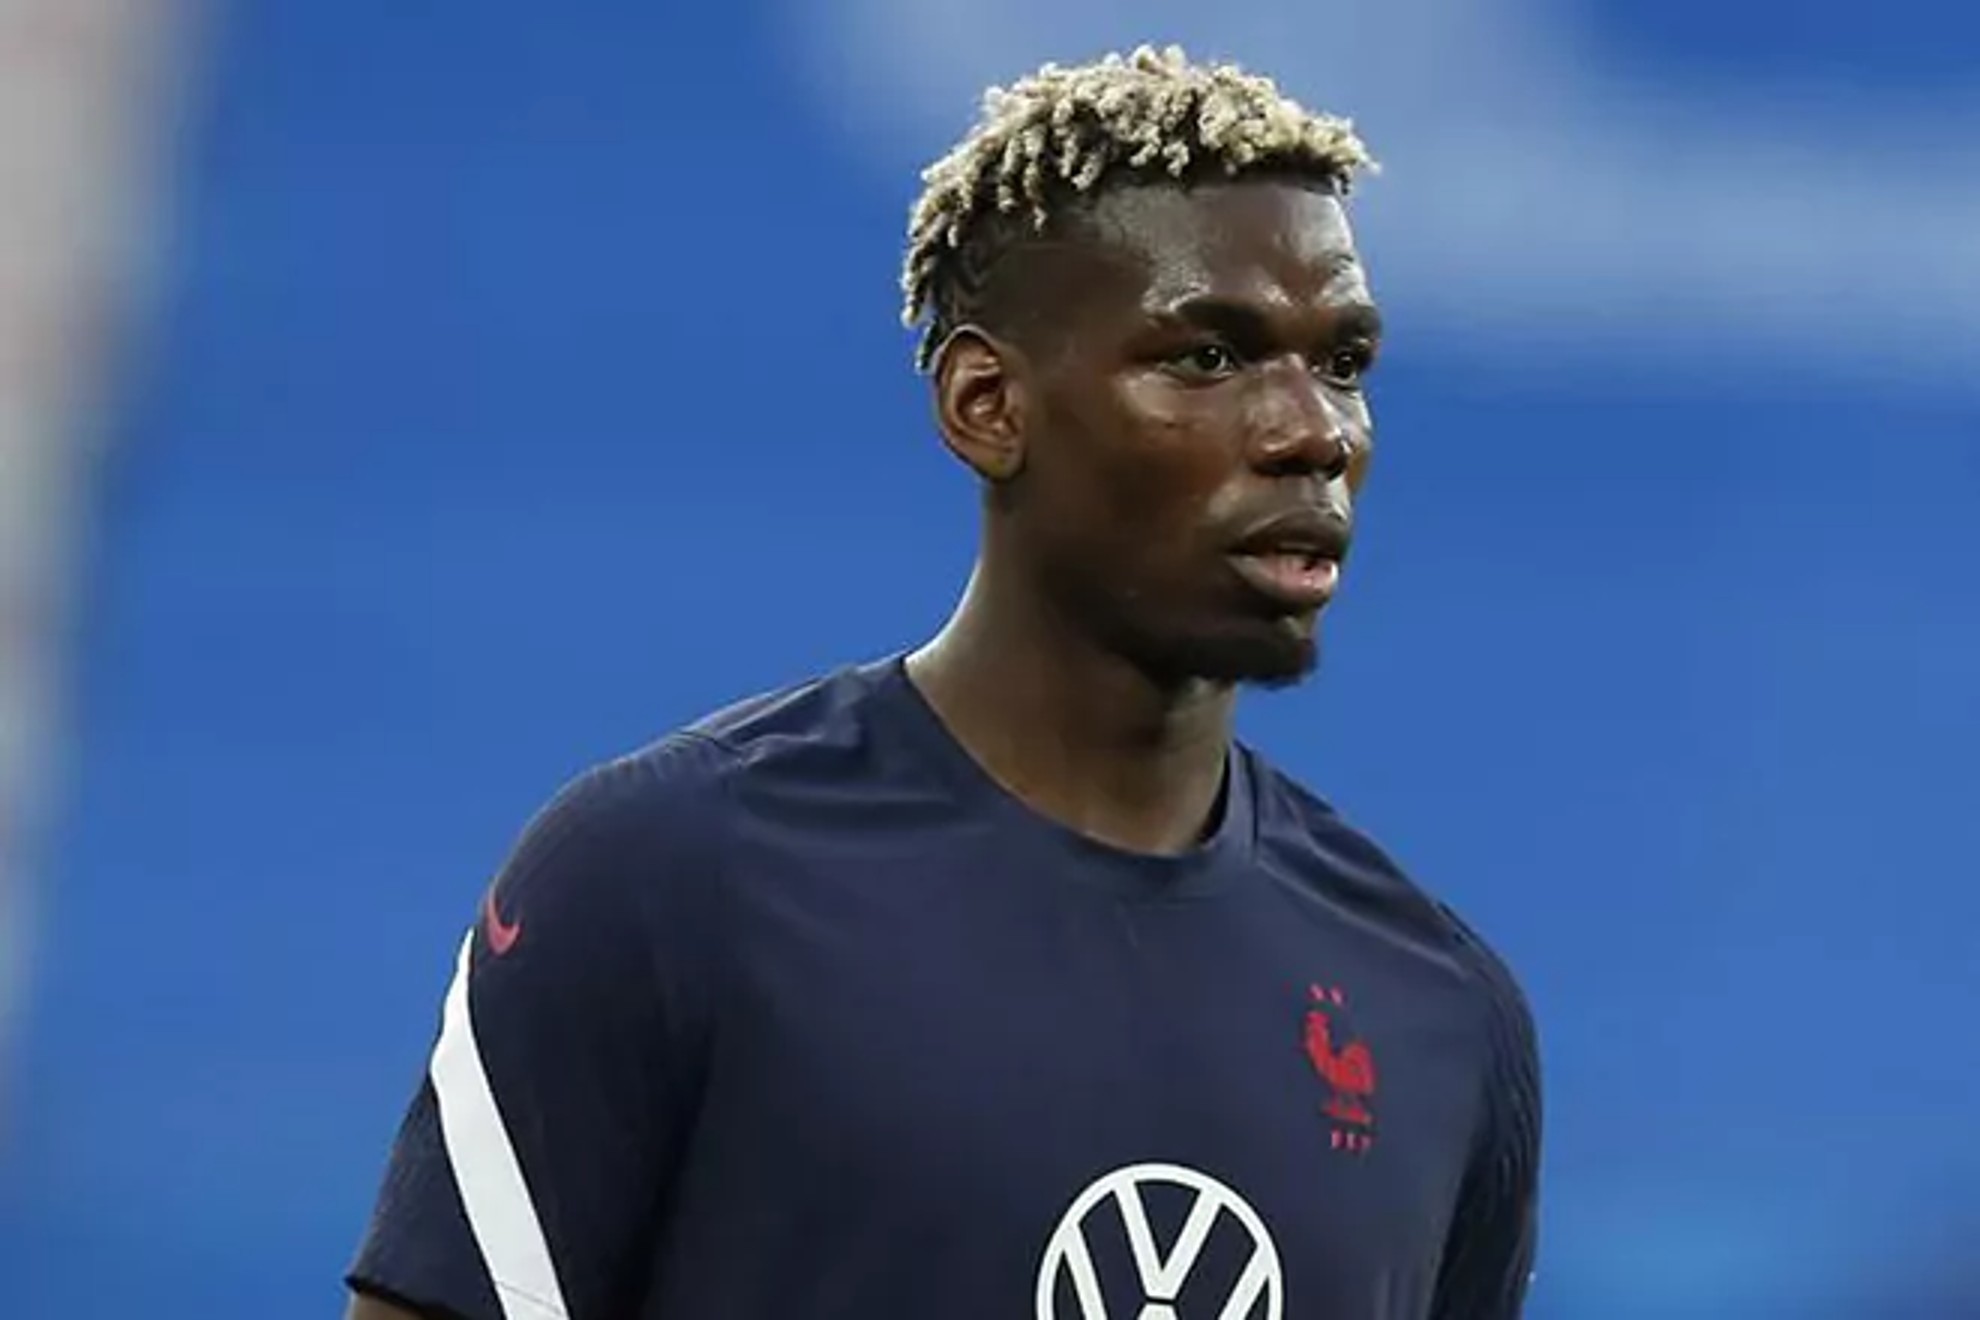 Pogba criticized after posting video of himself dancing while injured